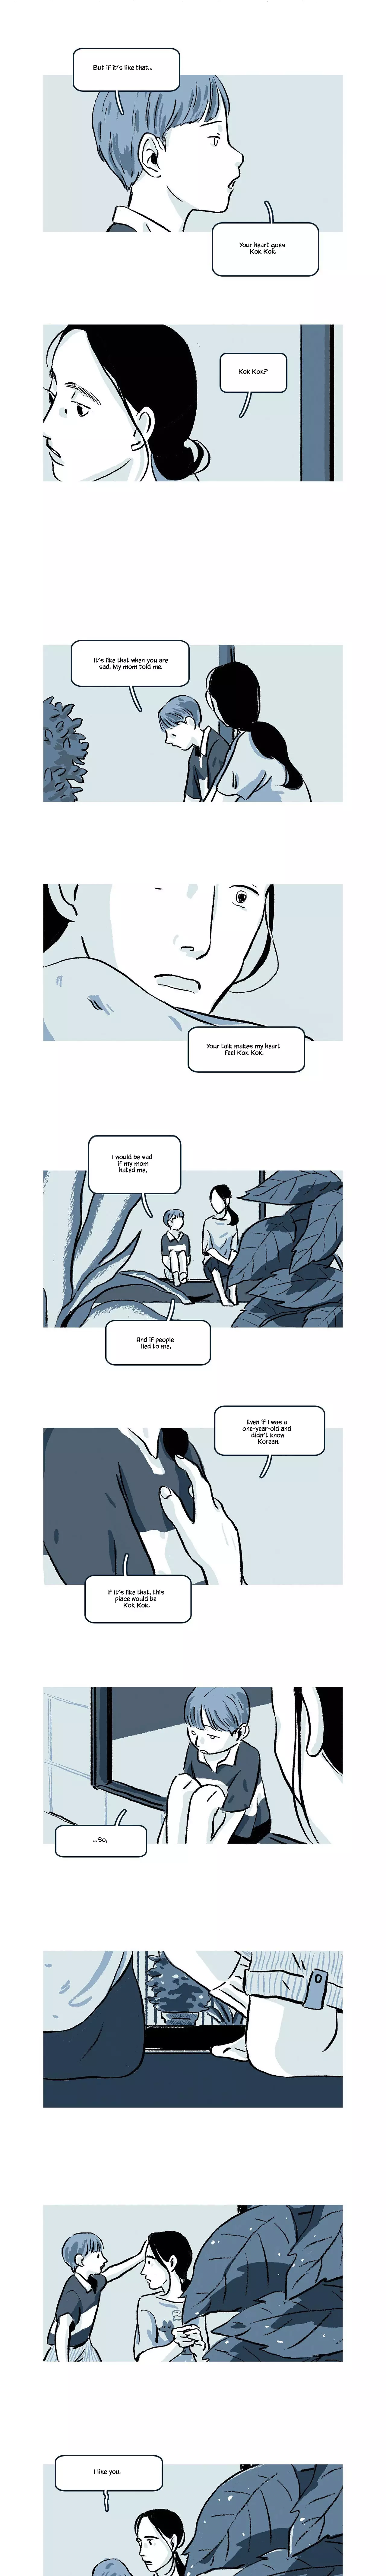 The Professor Who Reads Love Stories - 49 page 6-0c5fa8be